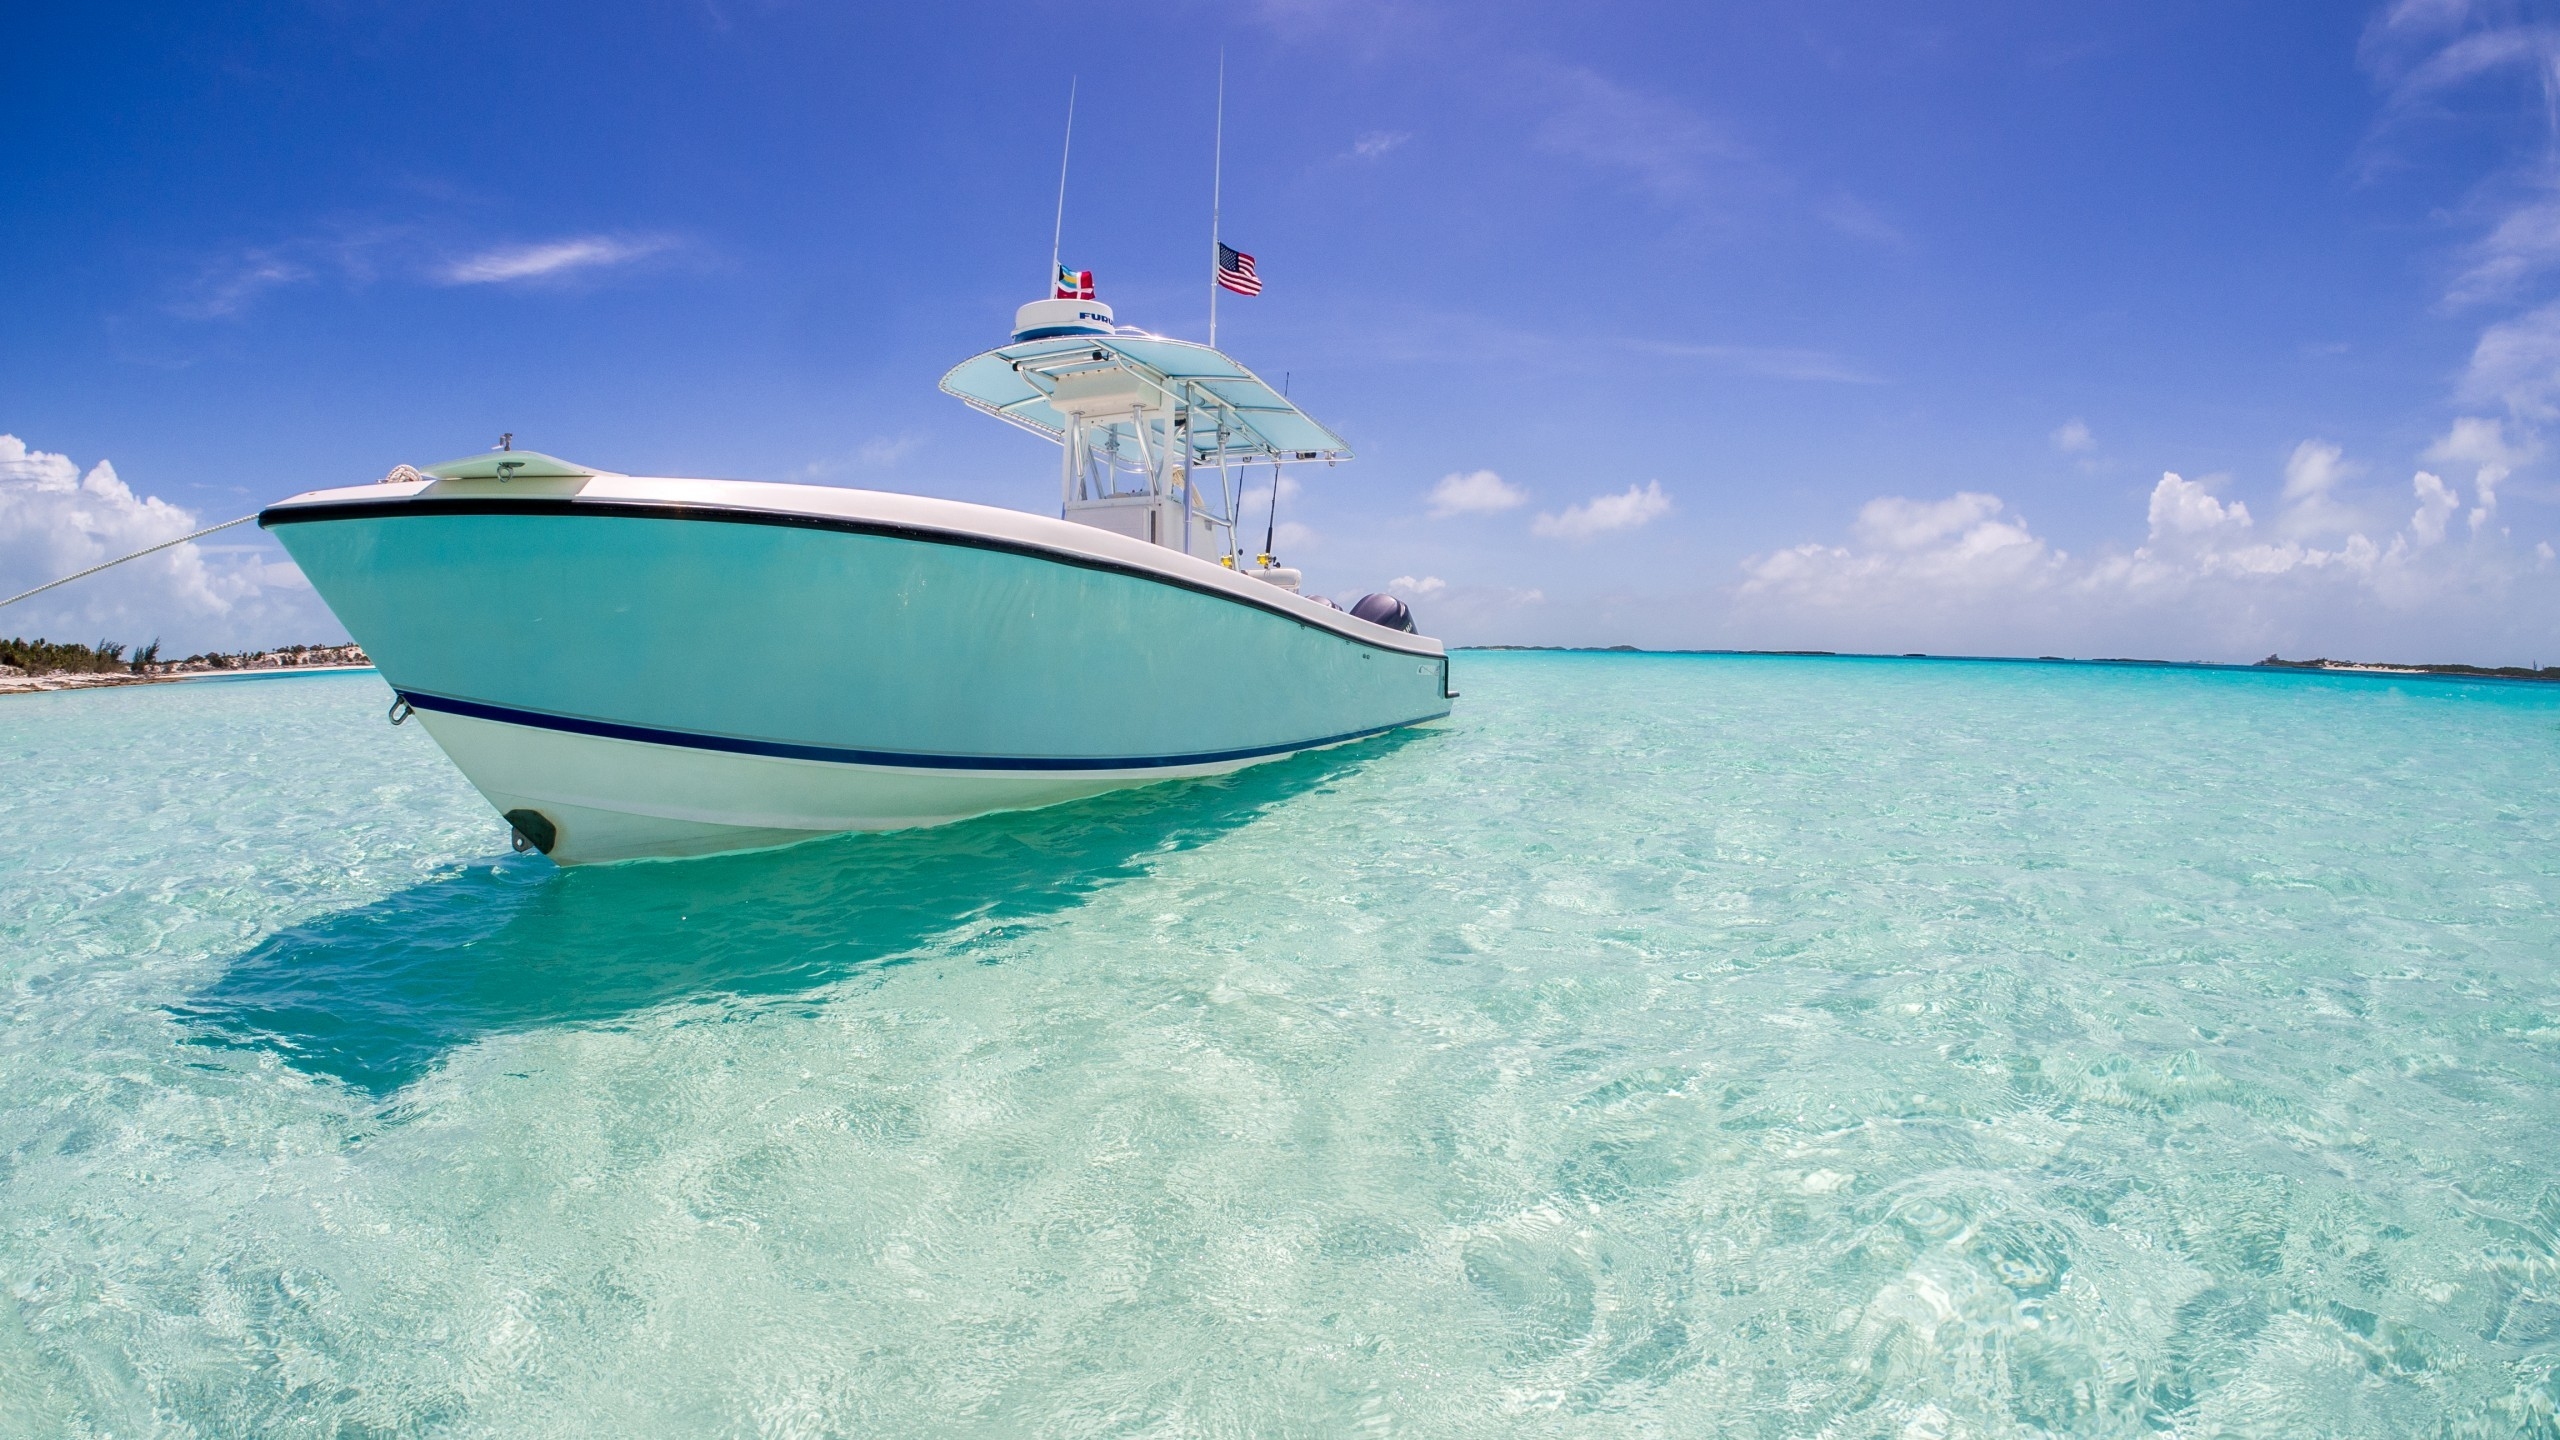 Boat in Paradise for 2560x1440 HDTV resolution